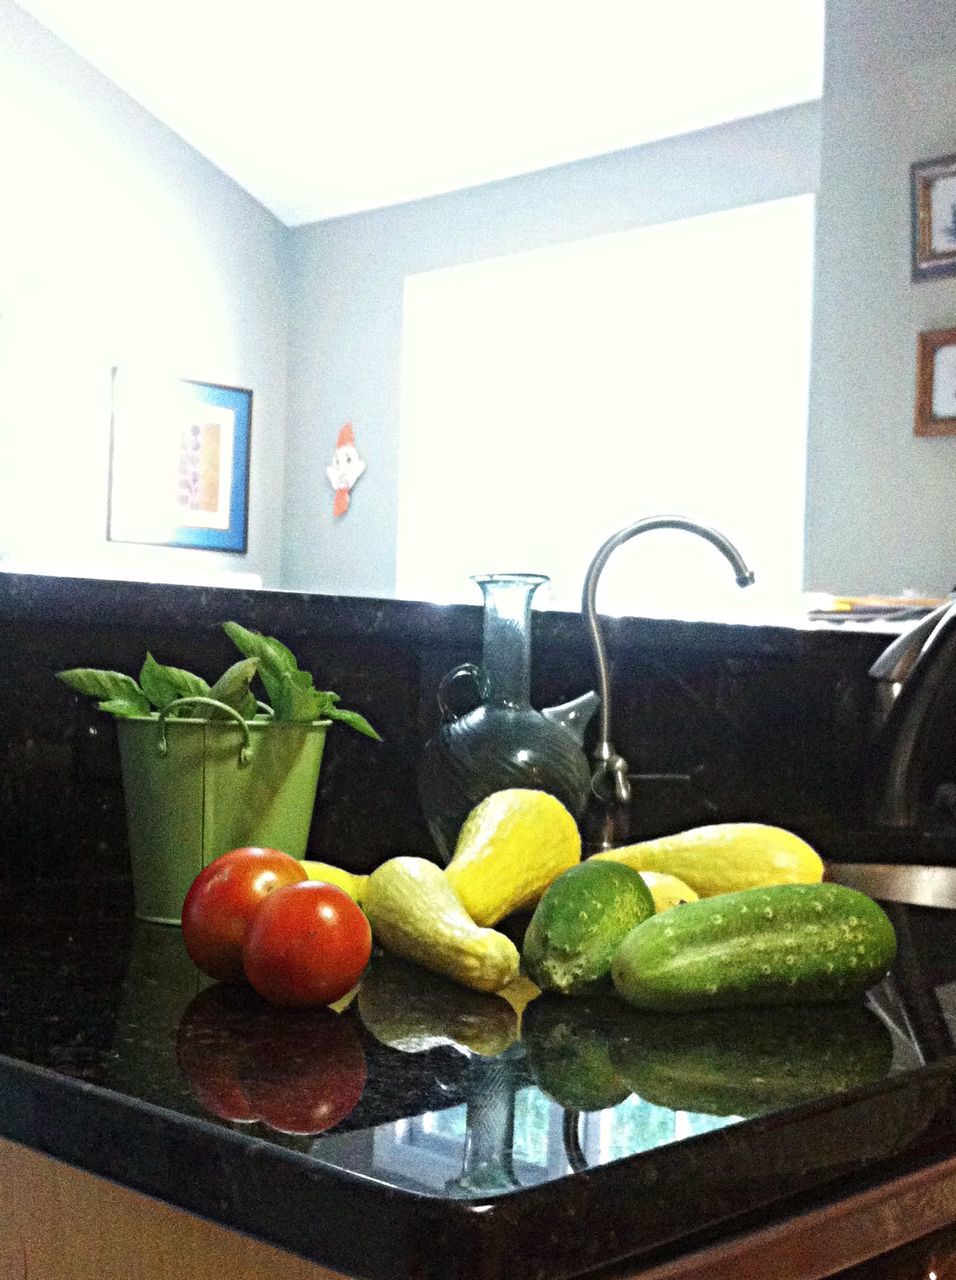 FRUITS AND VEGETABLES IN WINDOW